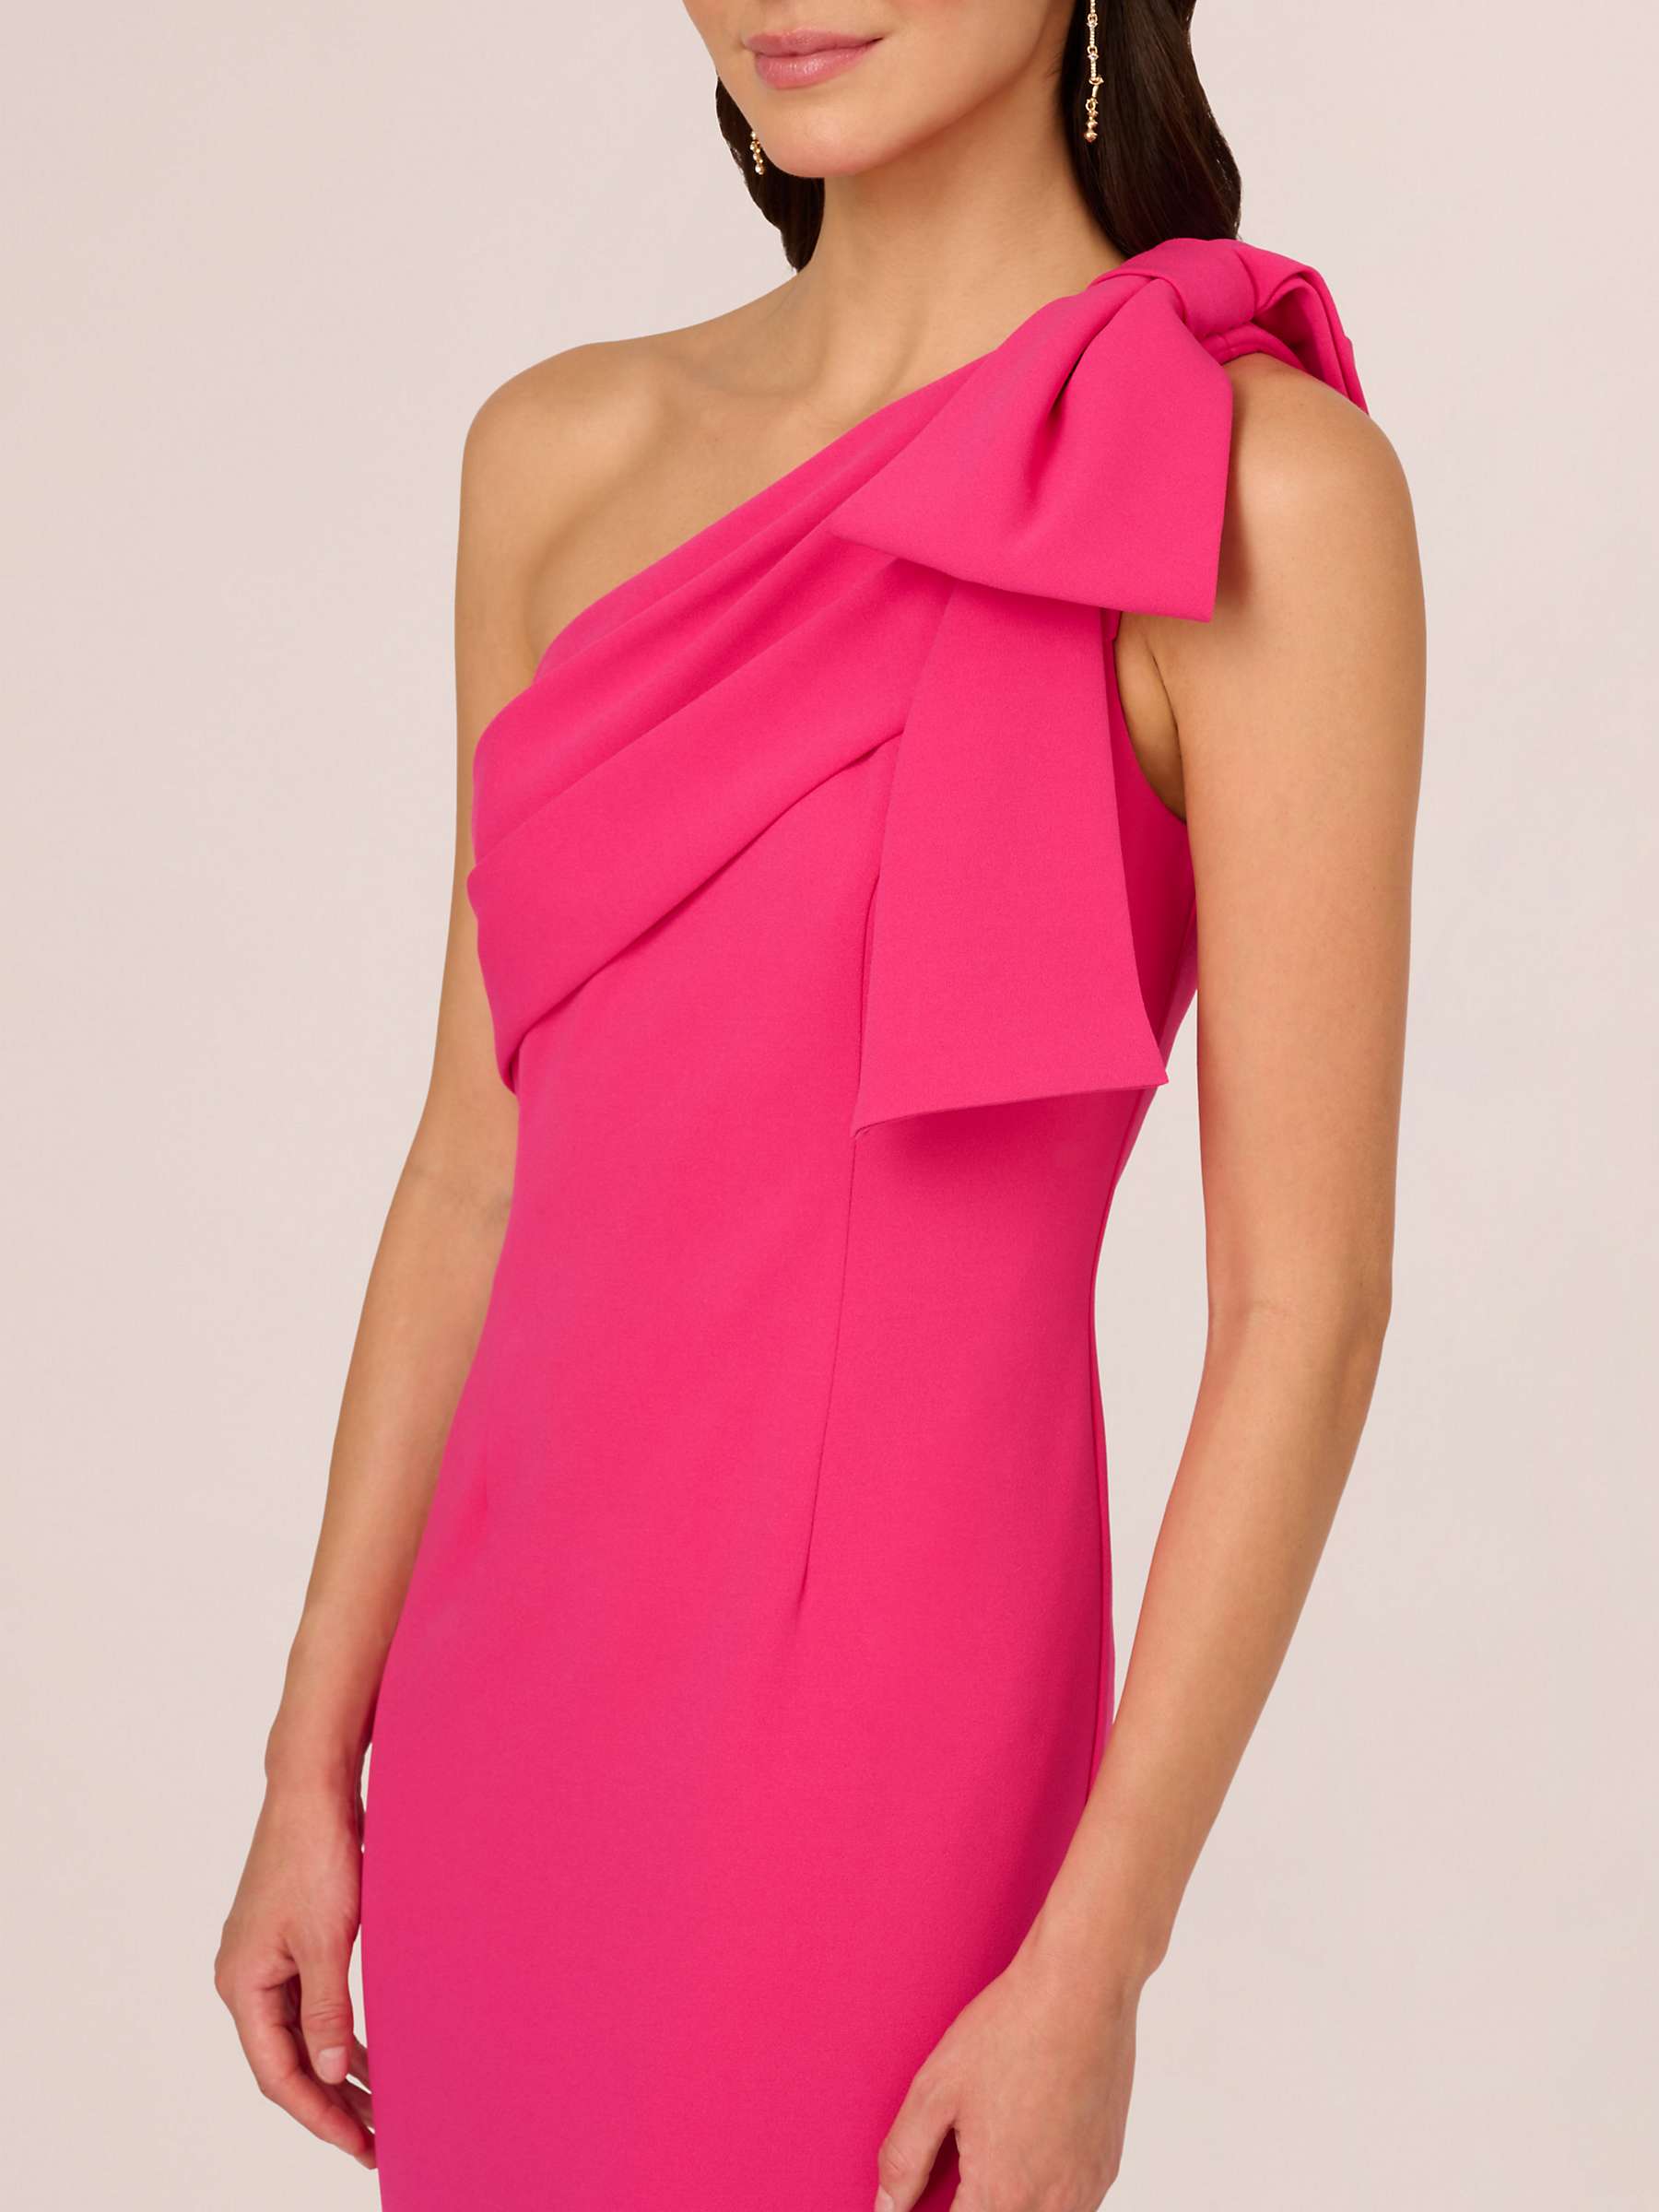 Buy Adrianna Papell Stretch Crepe Maxi Dress, Hot Pink Online at johnlewis.com